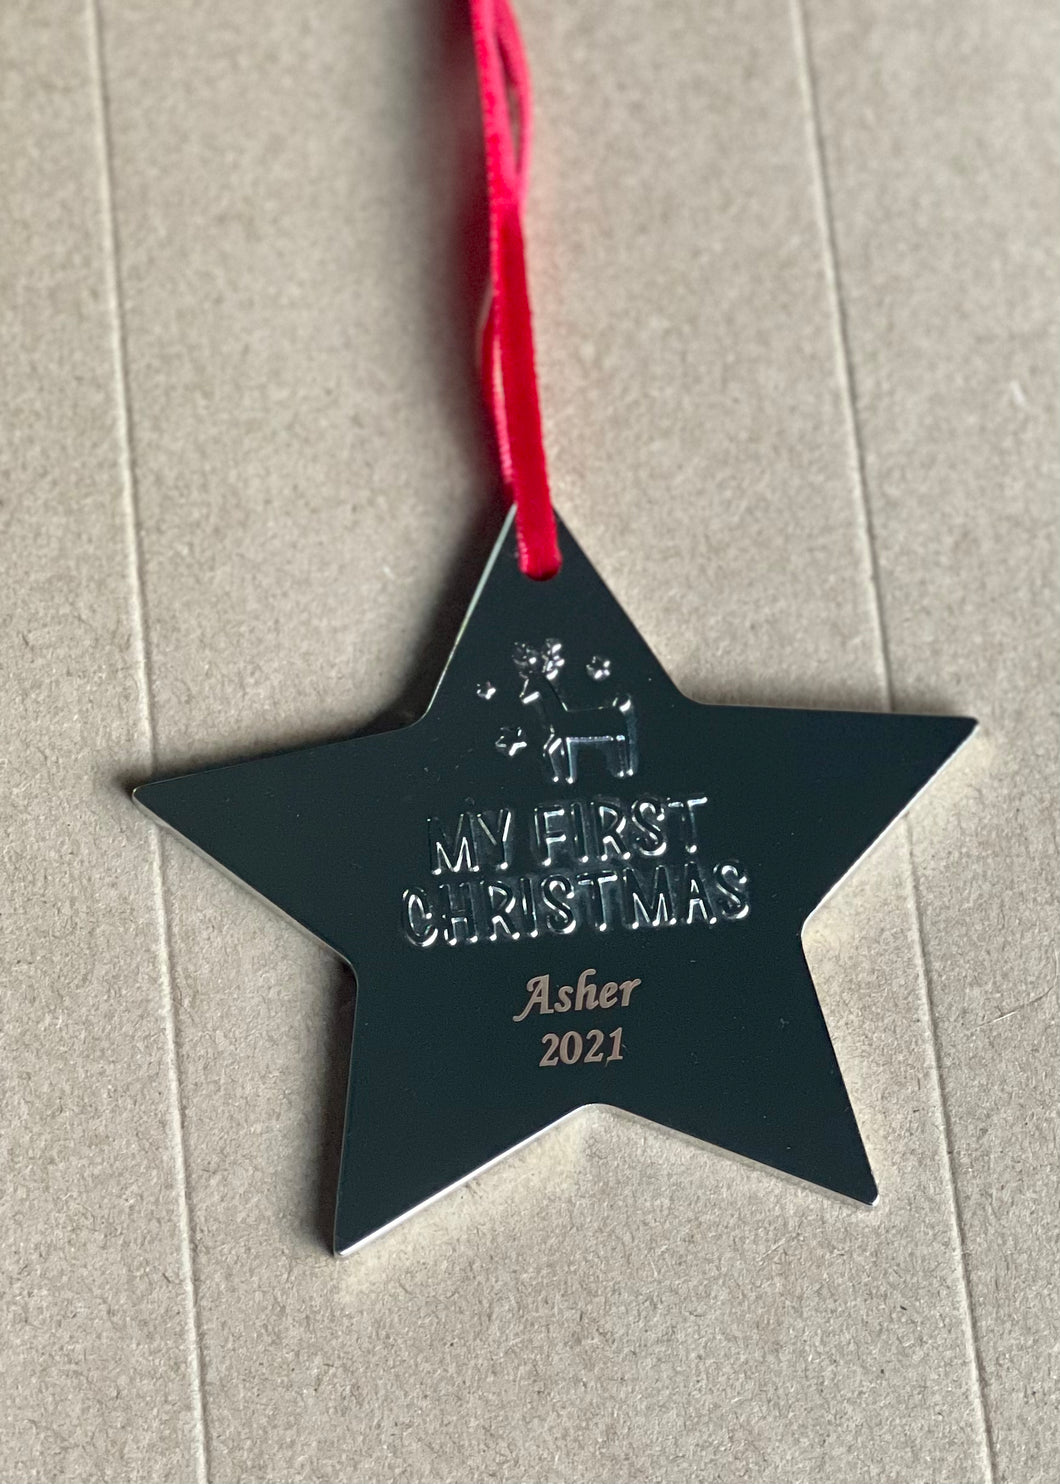 FREE - My First Christmas Star Decoration - Asher 2021